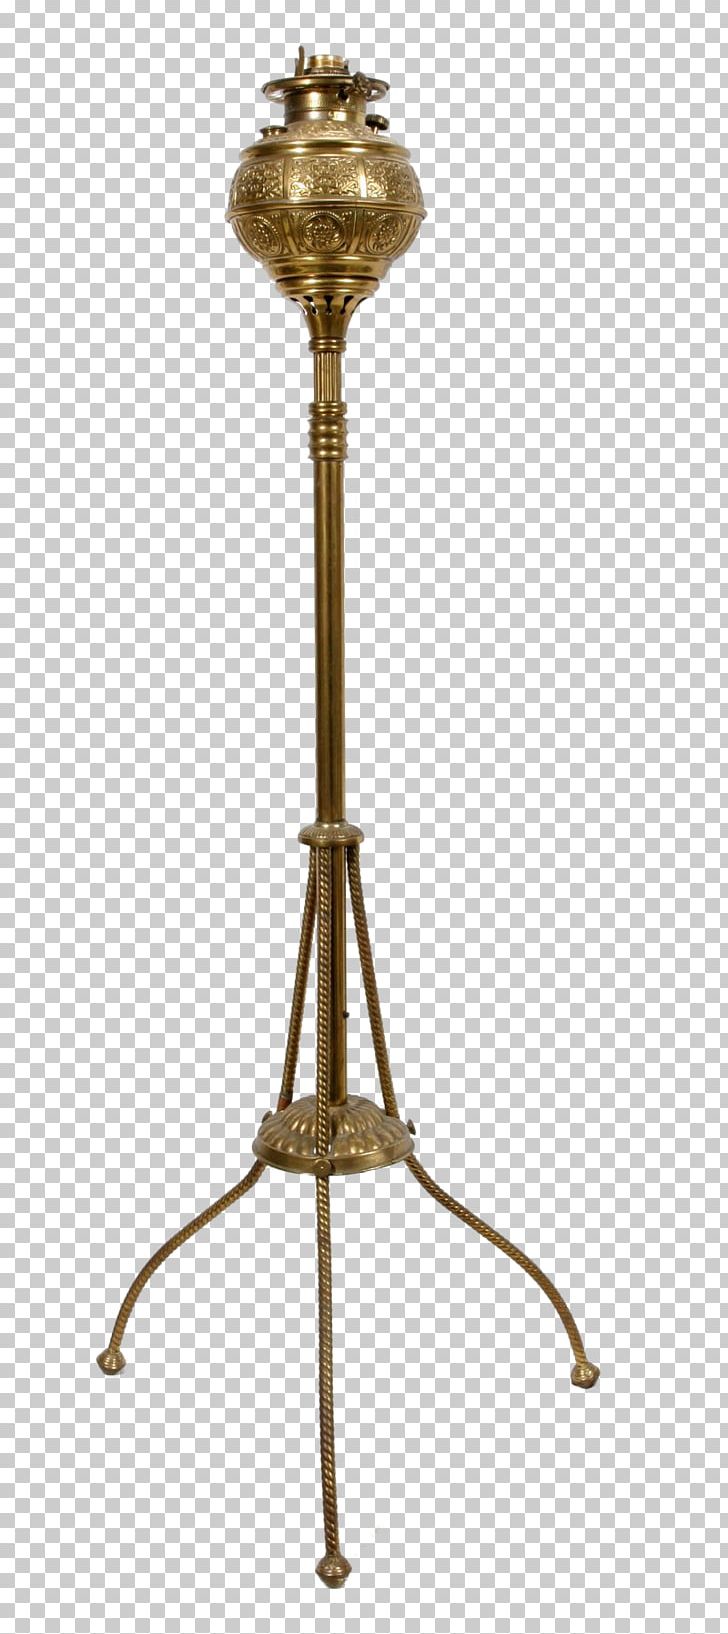 Lamp Icon PNG, Clipart, Brass, Ceiling Fixture, Decorative, Decorative Material, Designer Free PNG Download